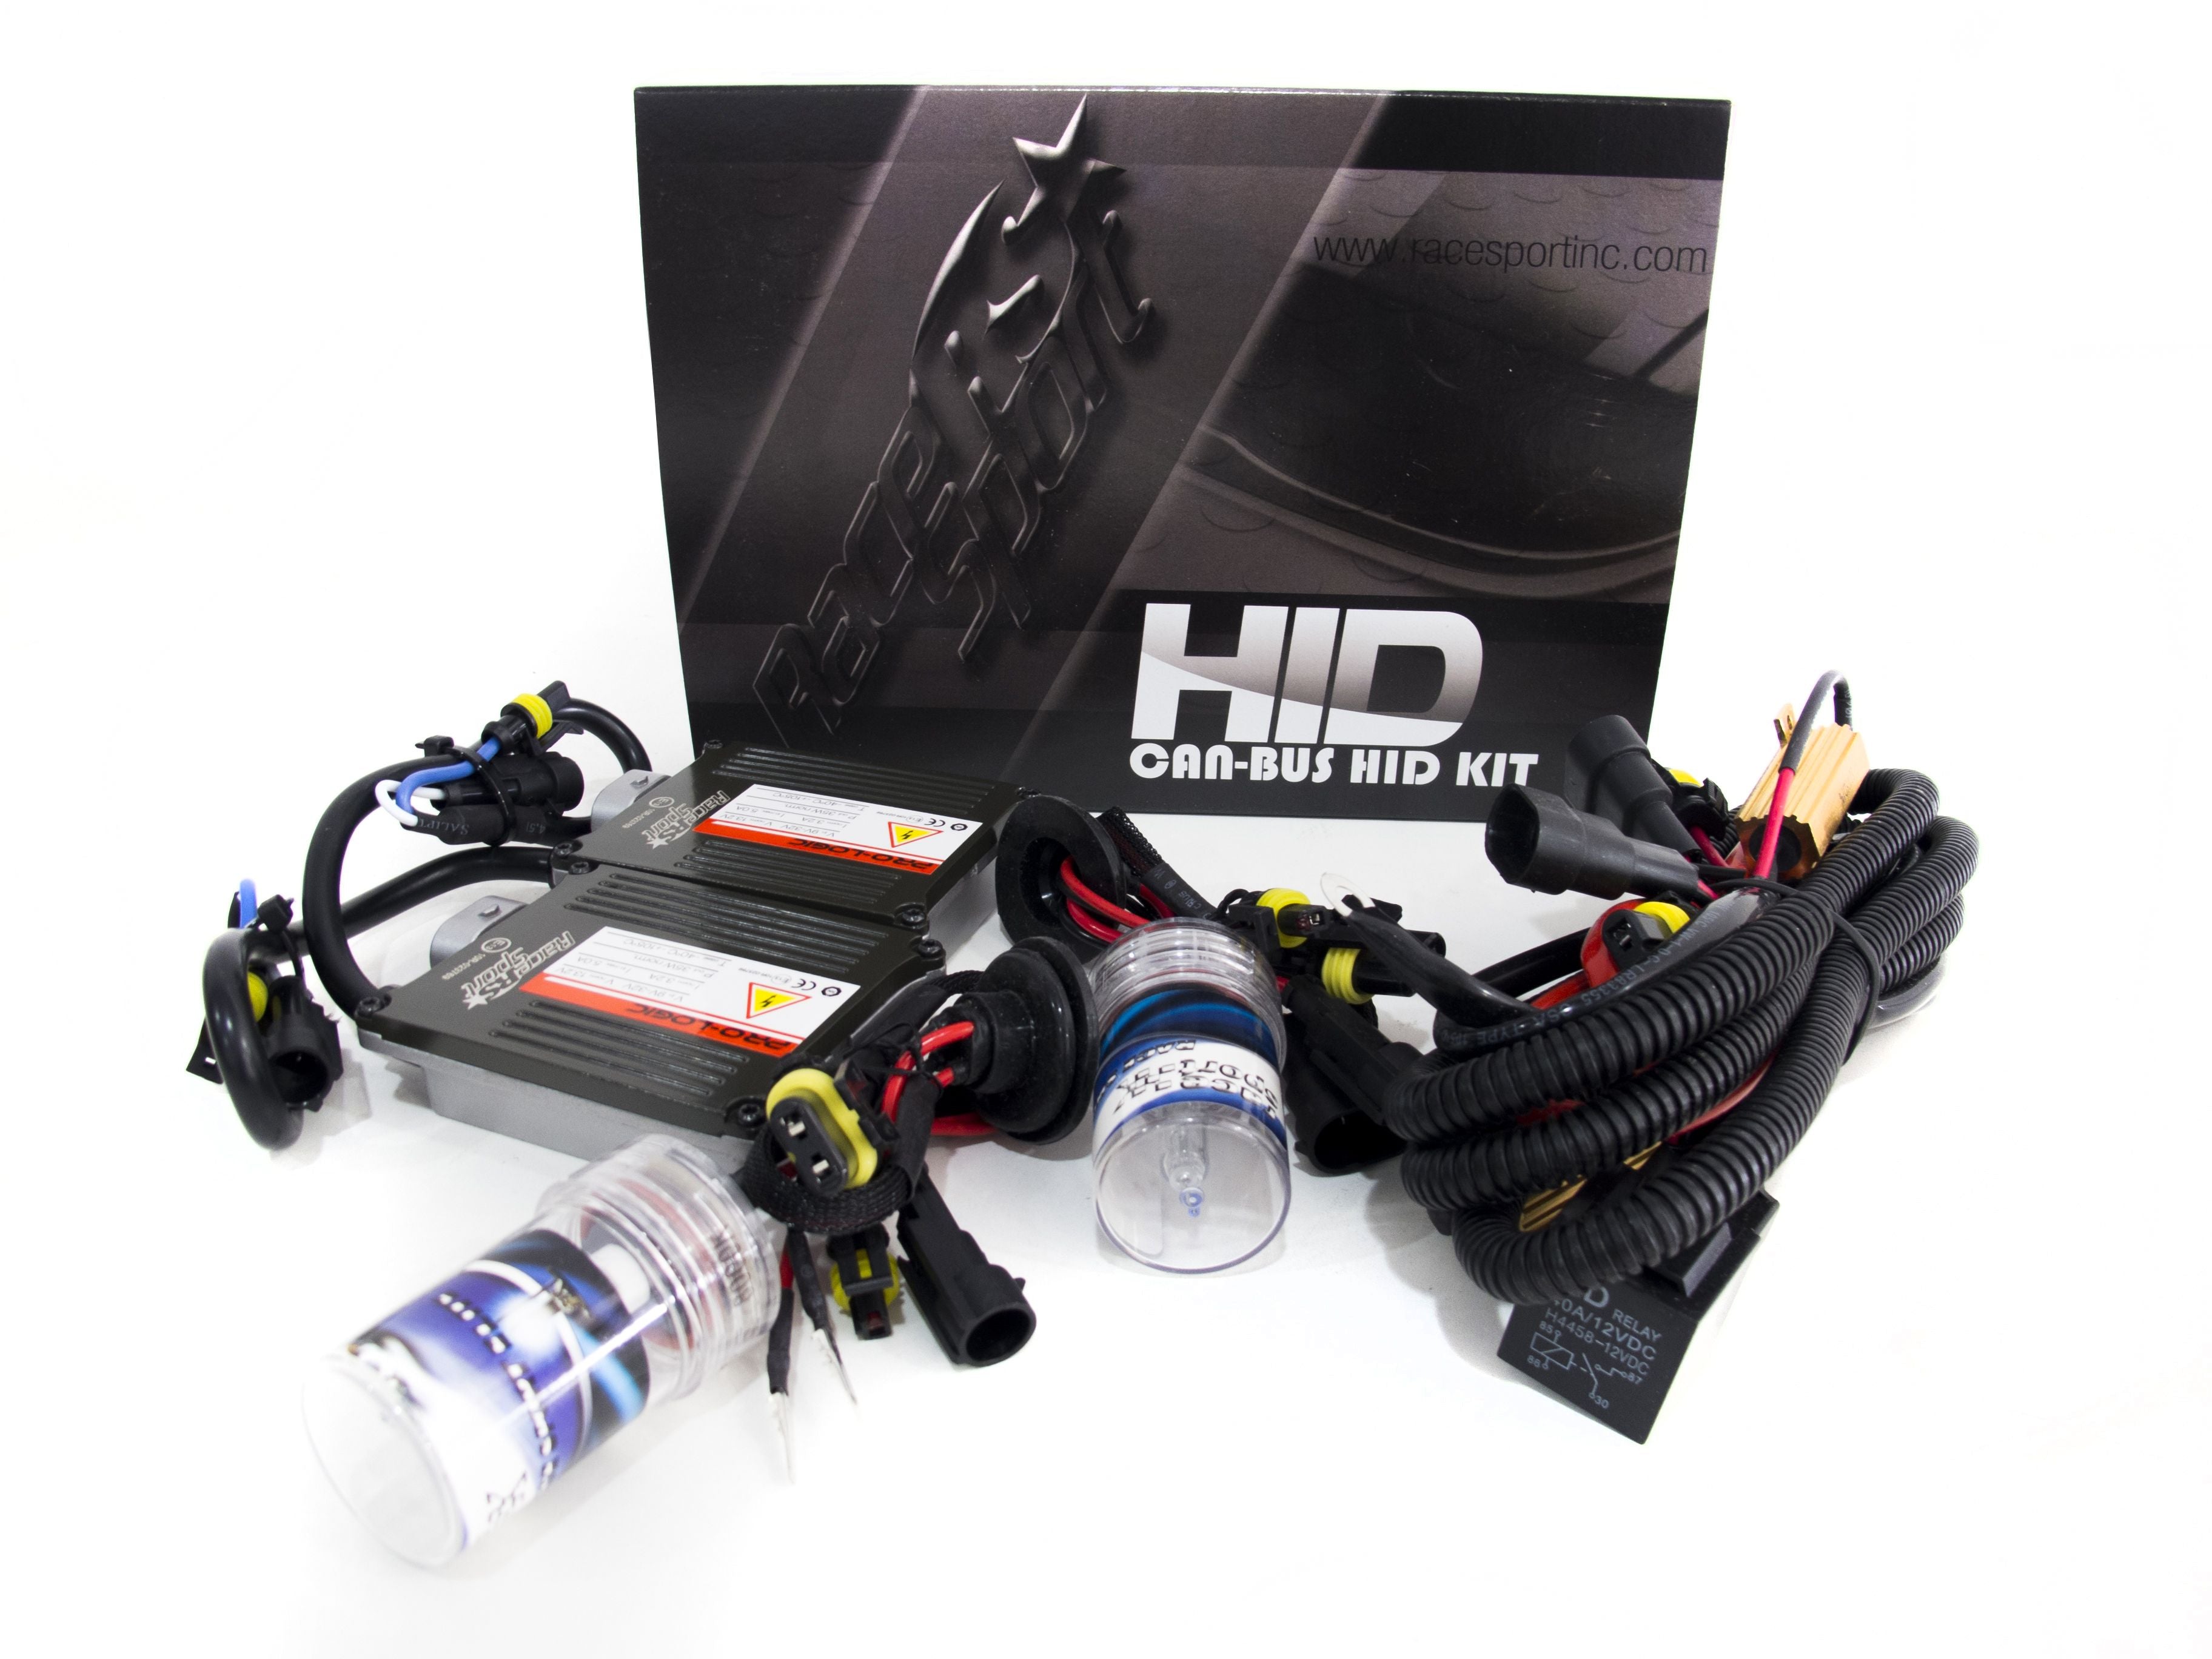 Race Sport H9 GEN 1 Canbus HID Mid Slim Ballast Kit with Relay Resistor Harness H9-12K-G1-CANBUS-R